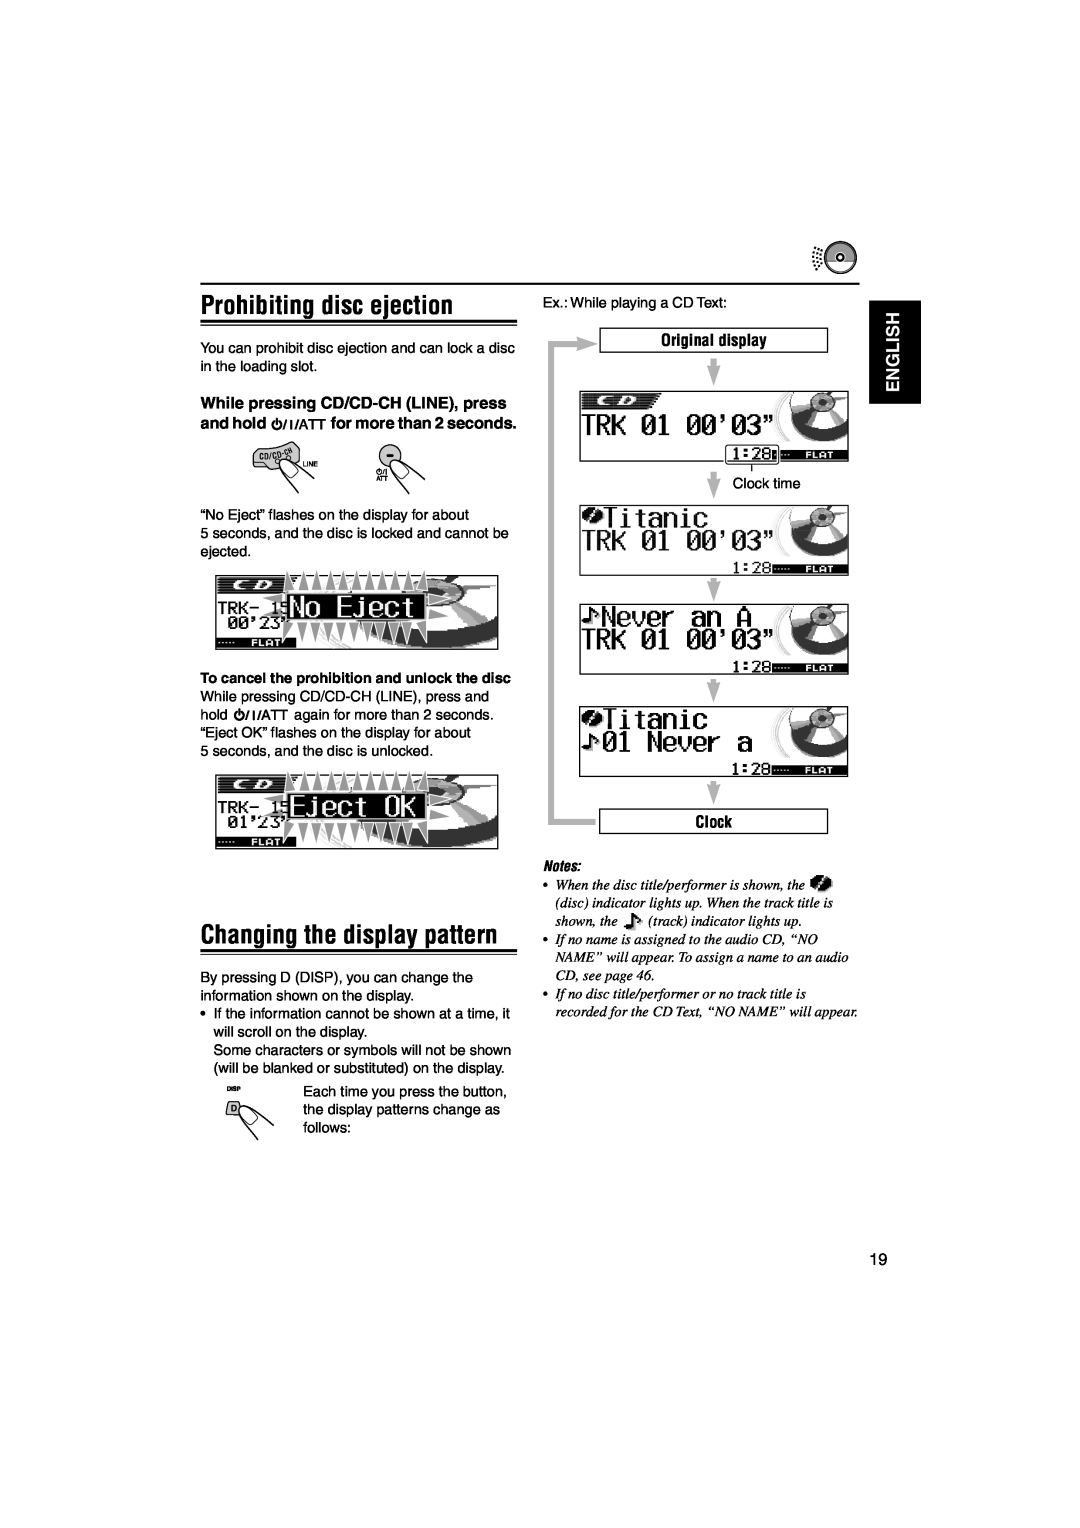 JVC KD-LH3105 manual Prohibiting disc ejection, Changing the display pattern, English 